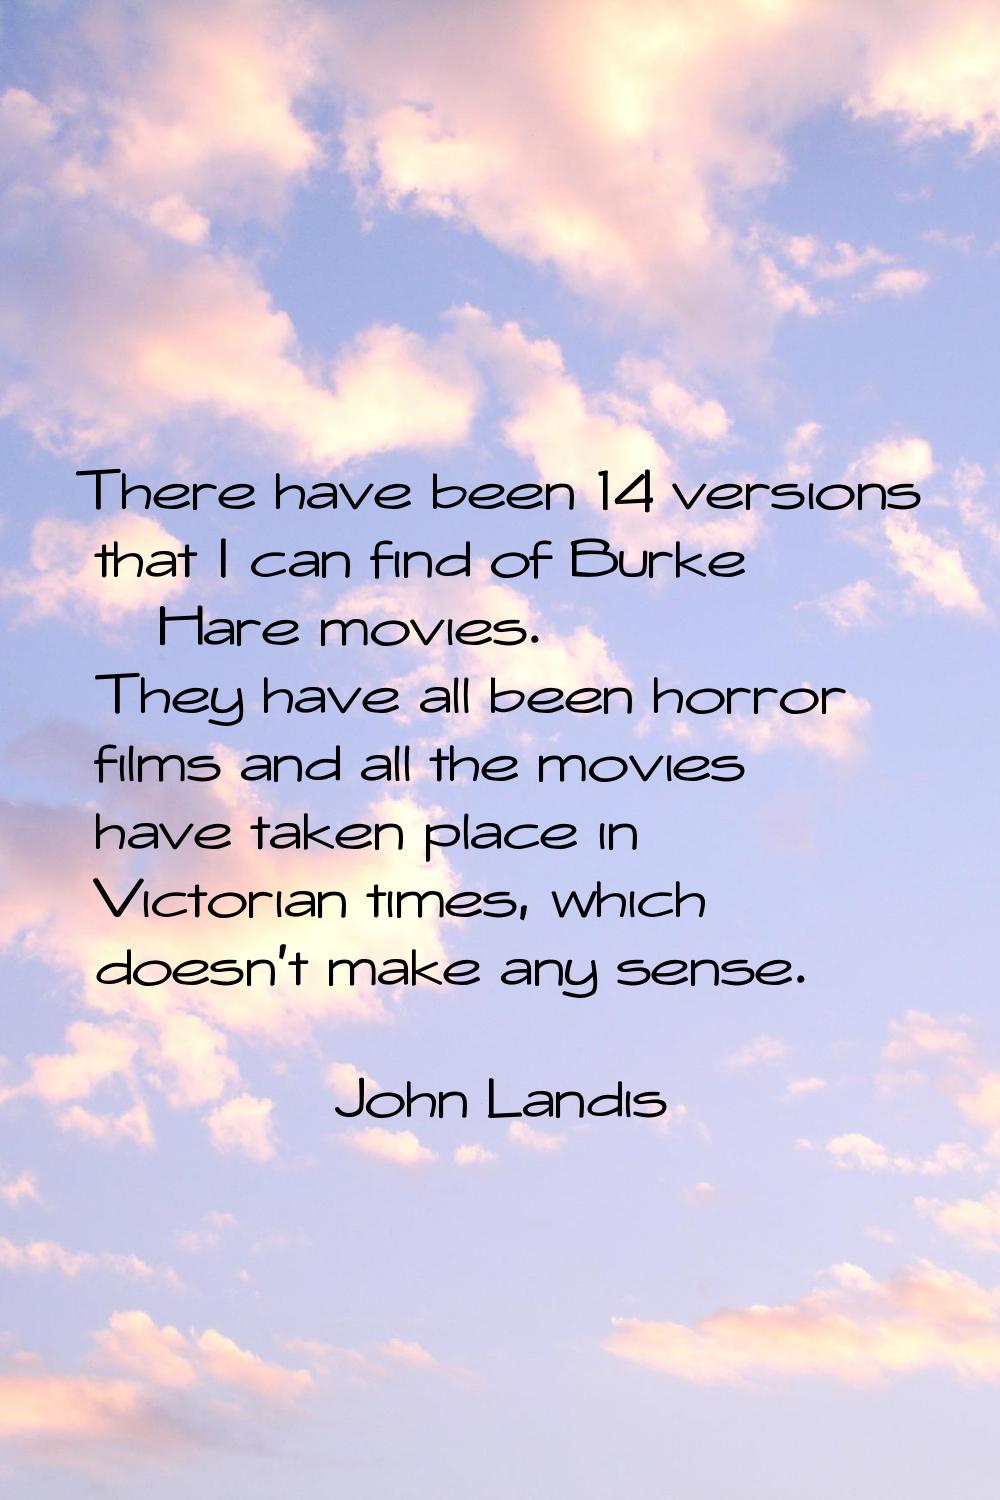 There have been 14 versions that I can find of Burke & Hare movies. They have all been horror films